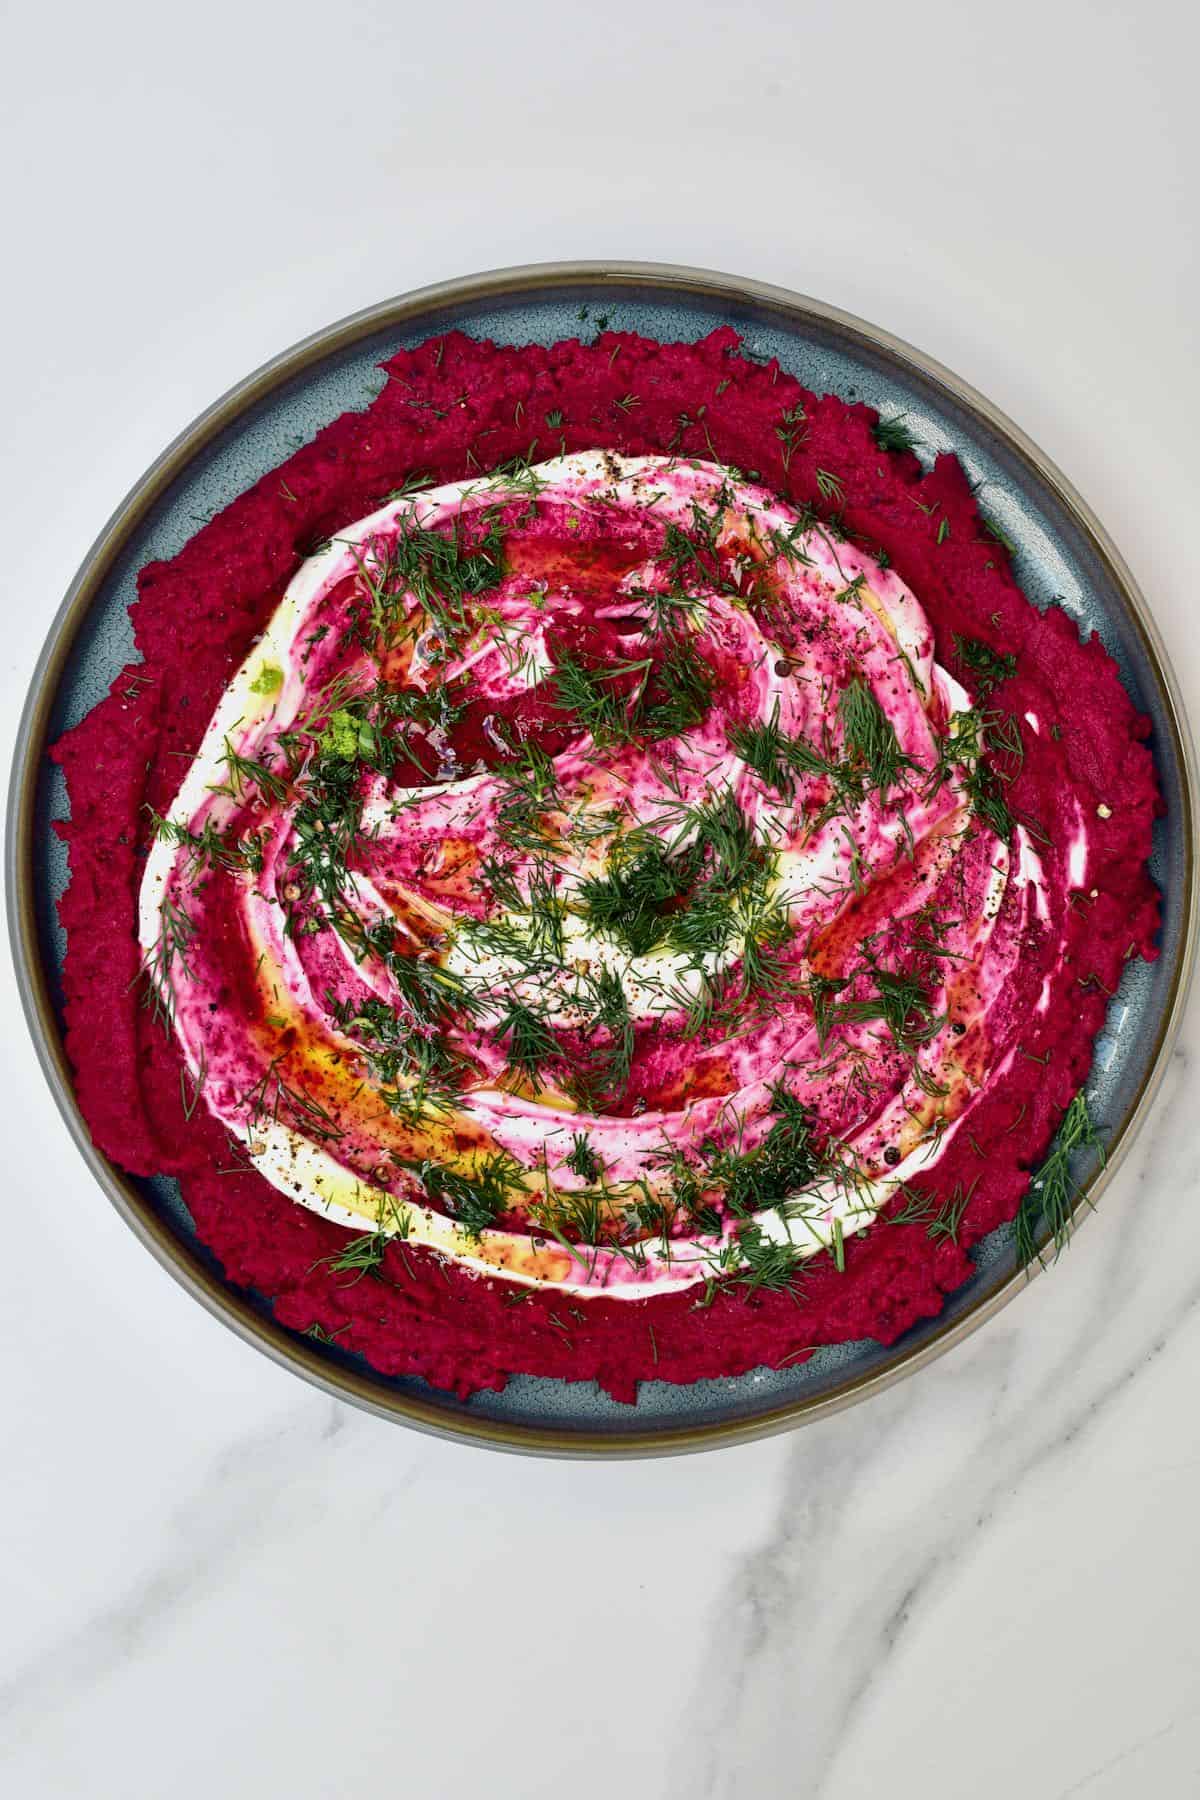 Beetroot hummus topped with dill whipped cheese and oil